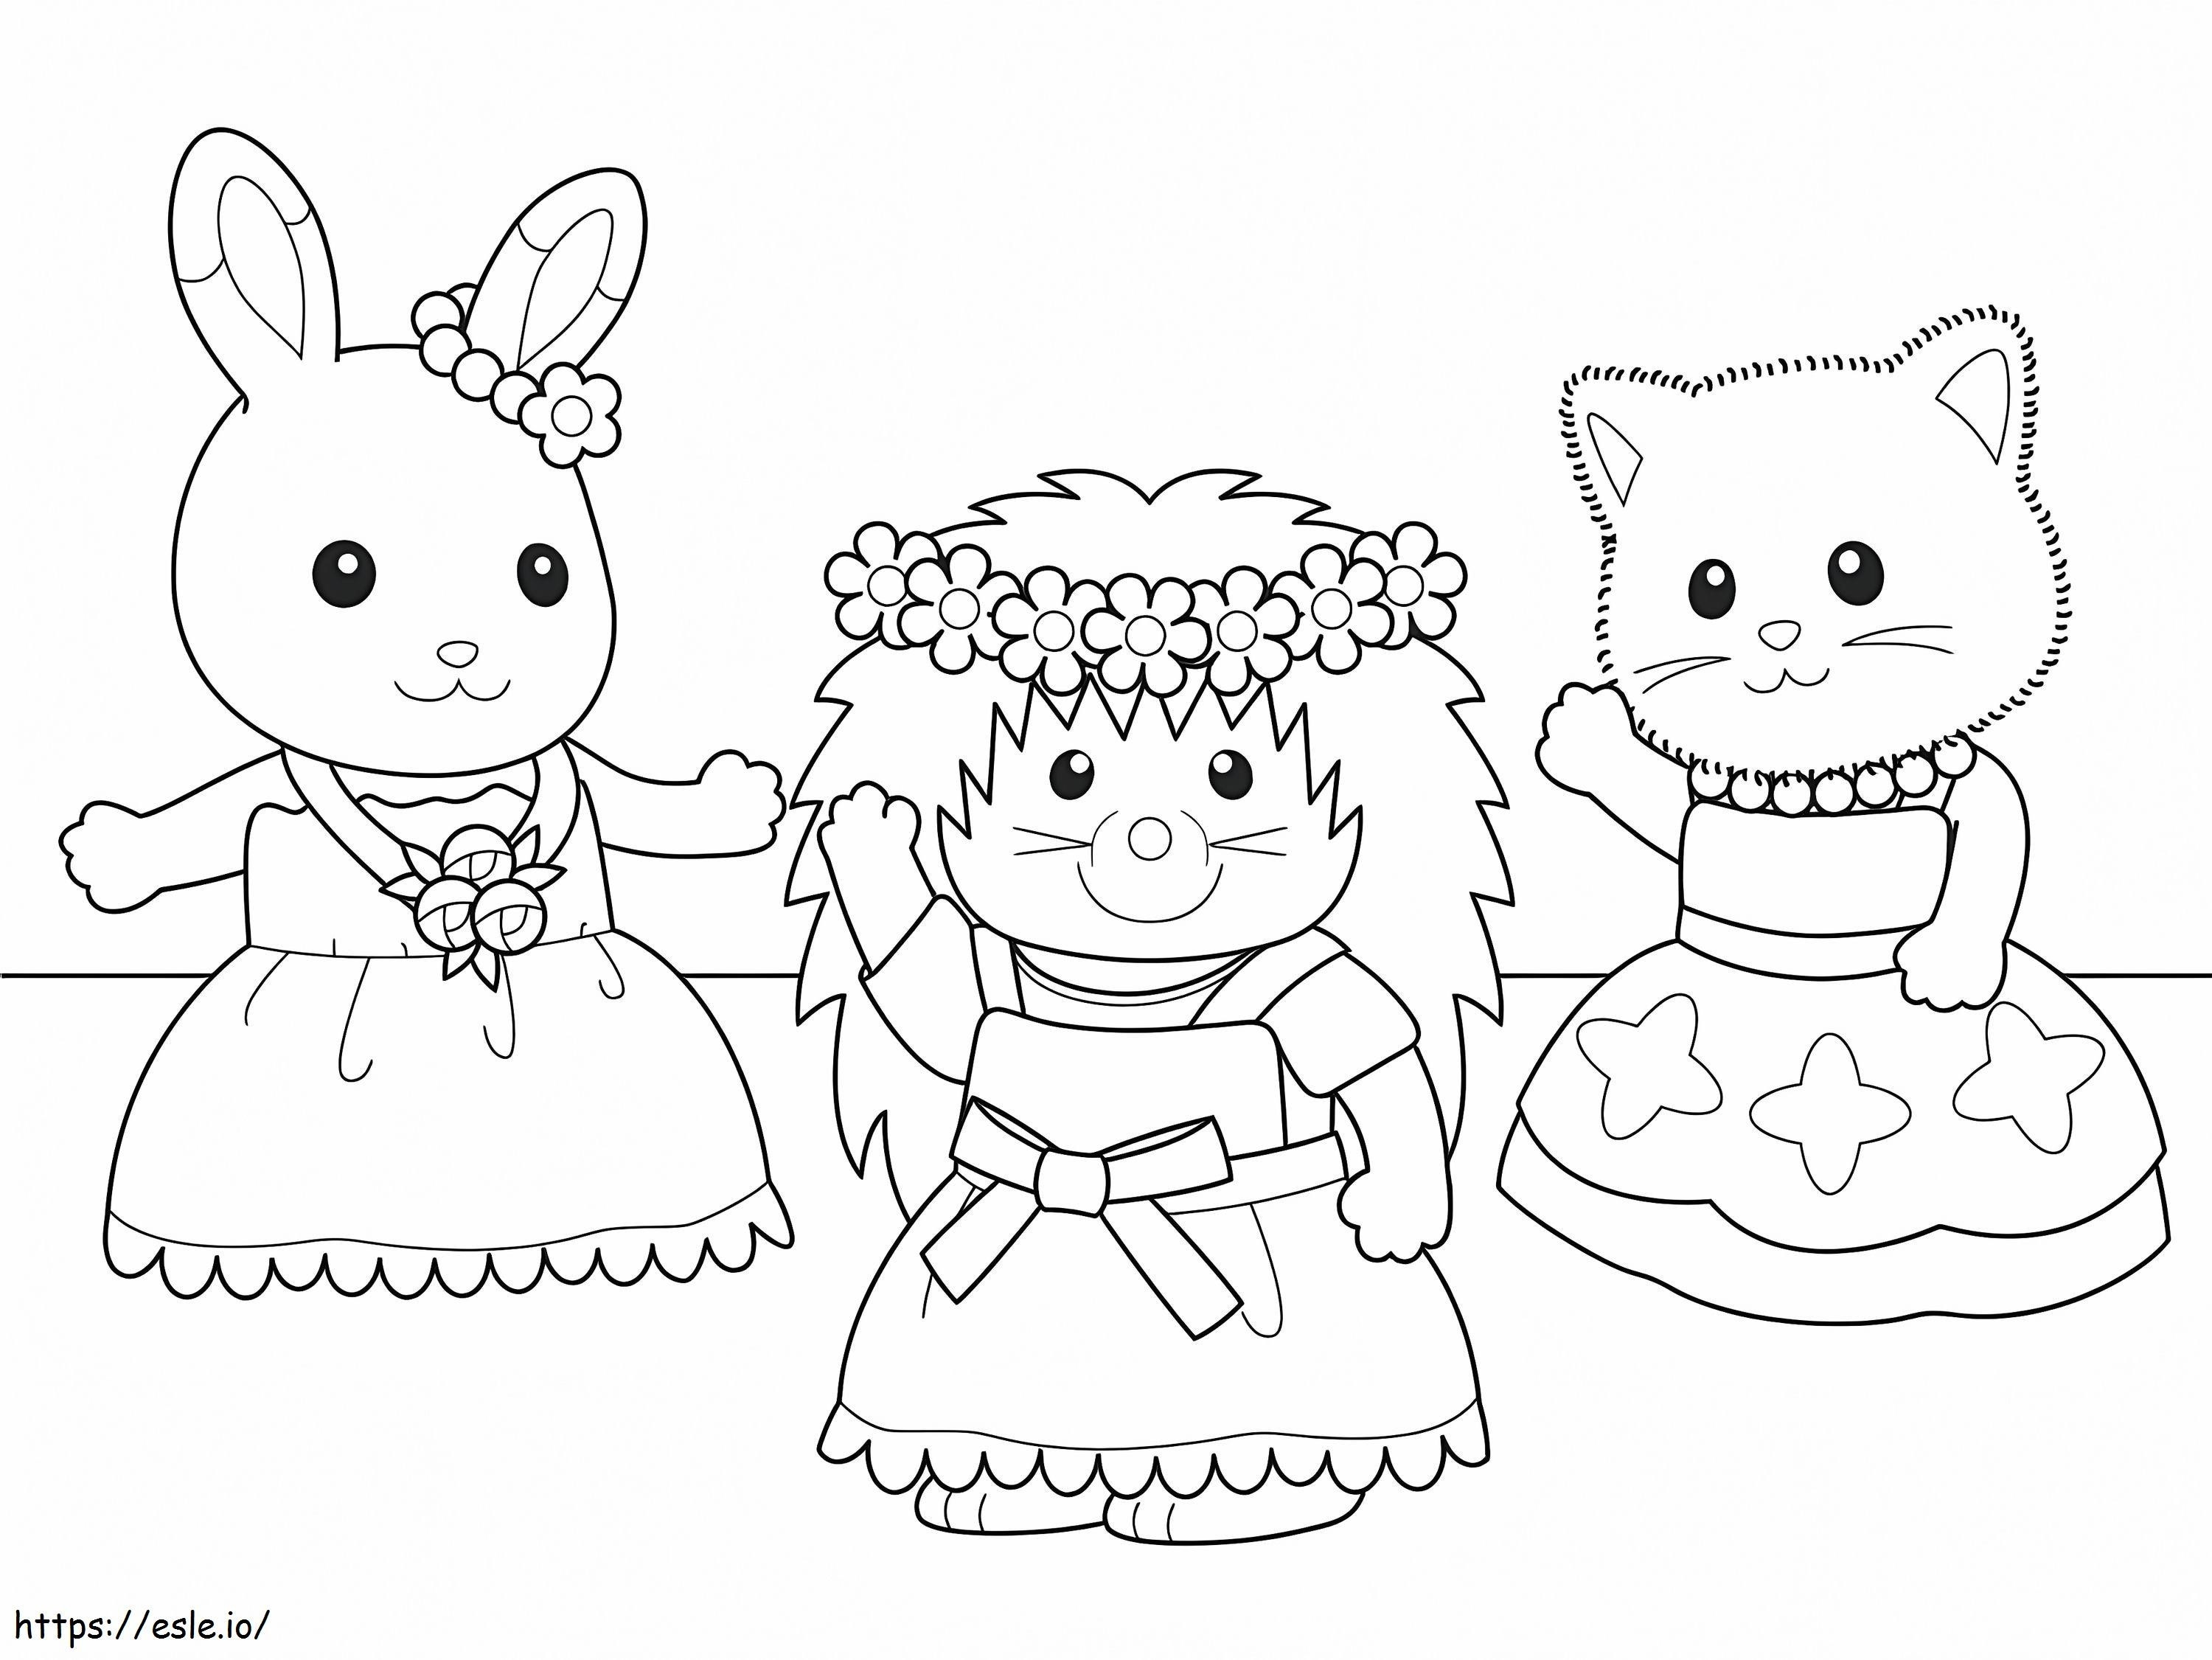 Pretty Sylvanian Families coloring page